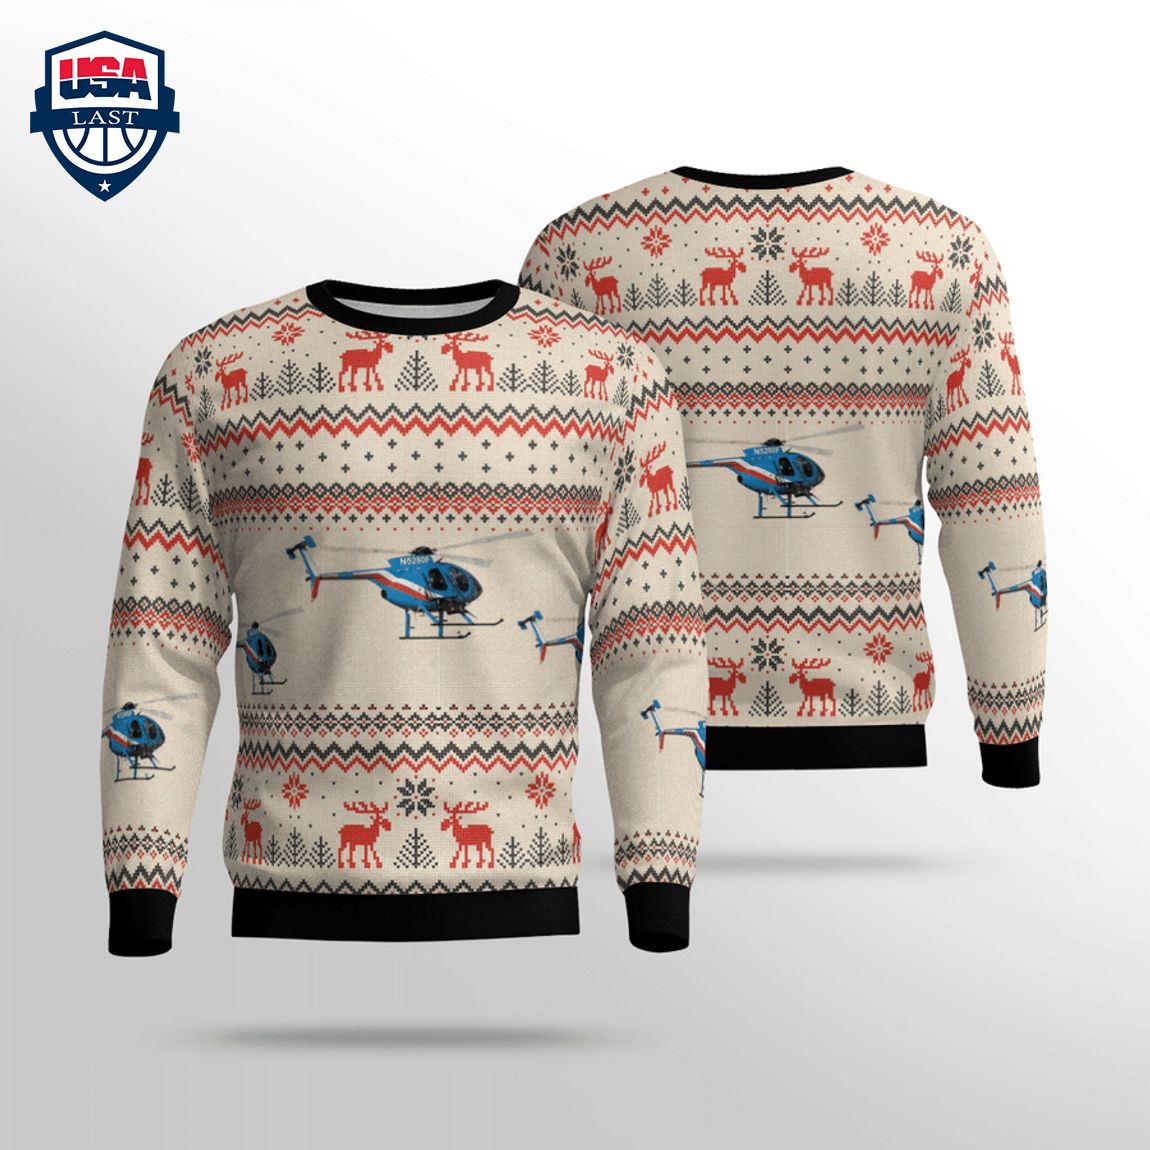 Houston Police MD-500E 3D Christmas Sweater